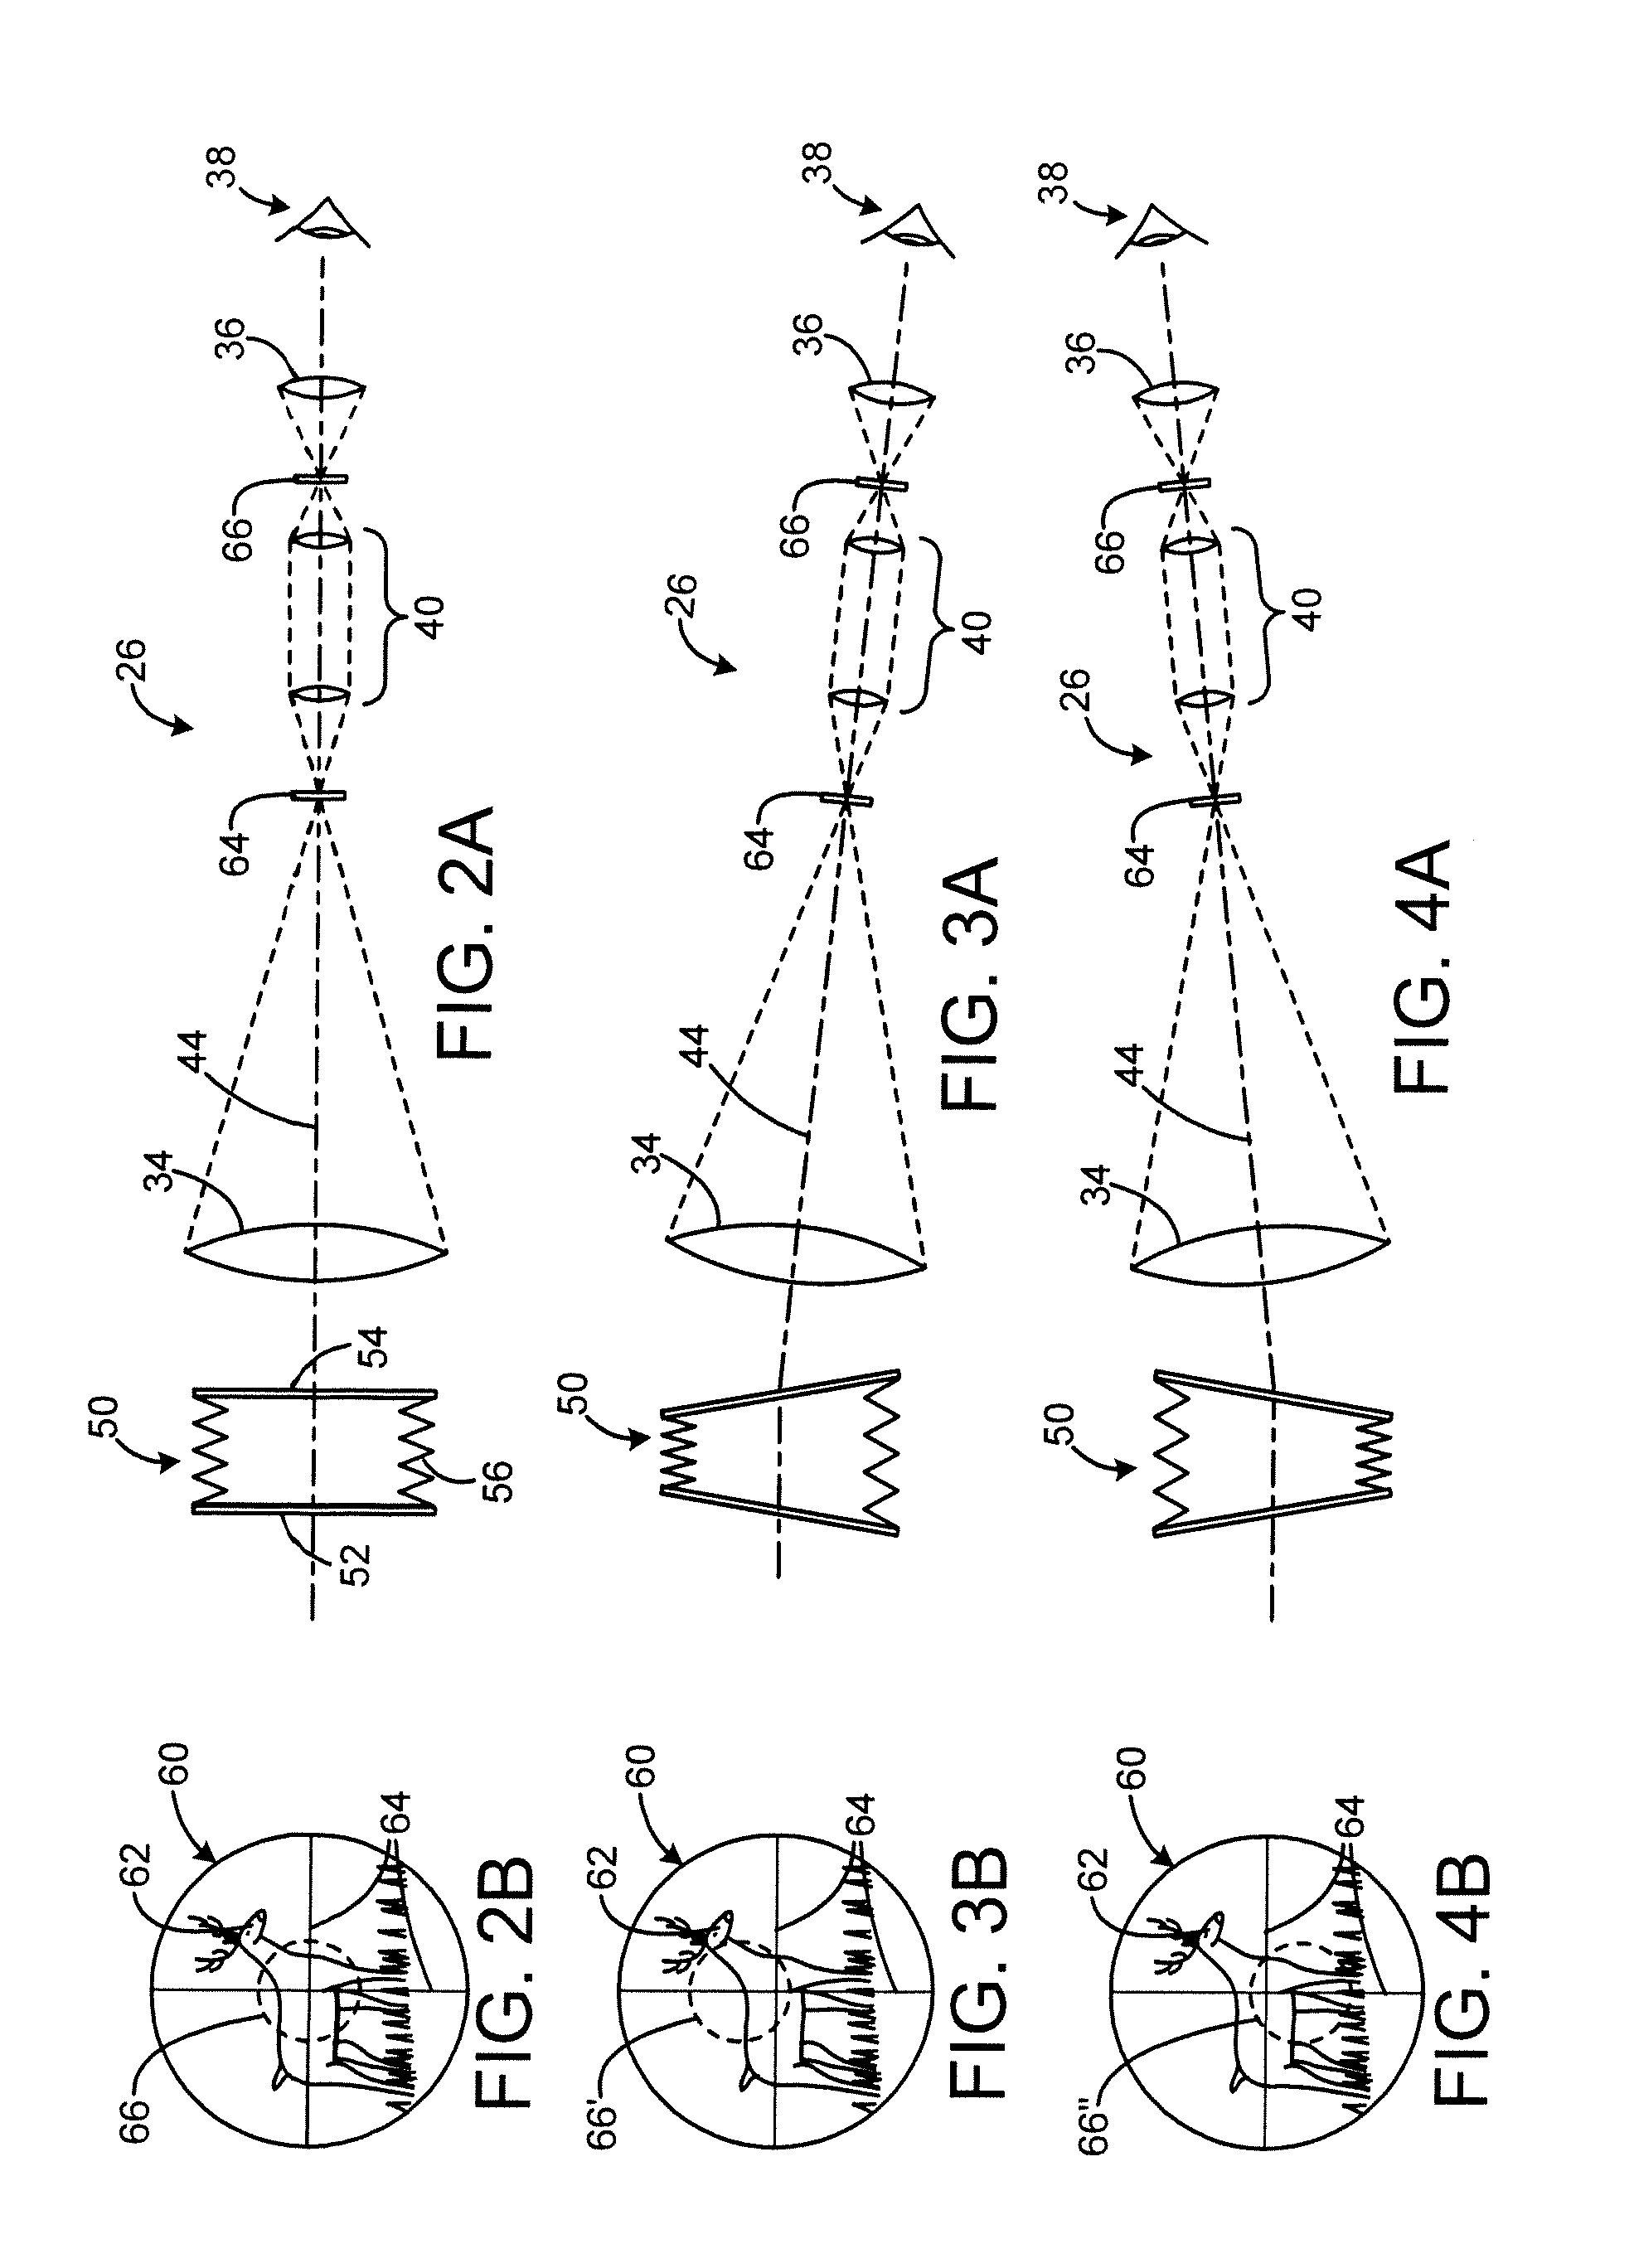 Method of Movement Compensation for a Weapon